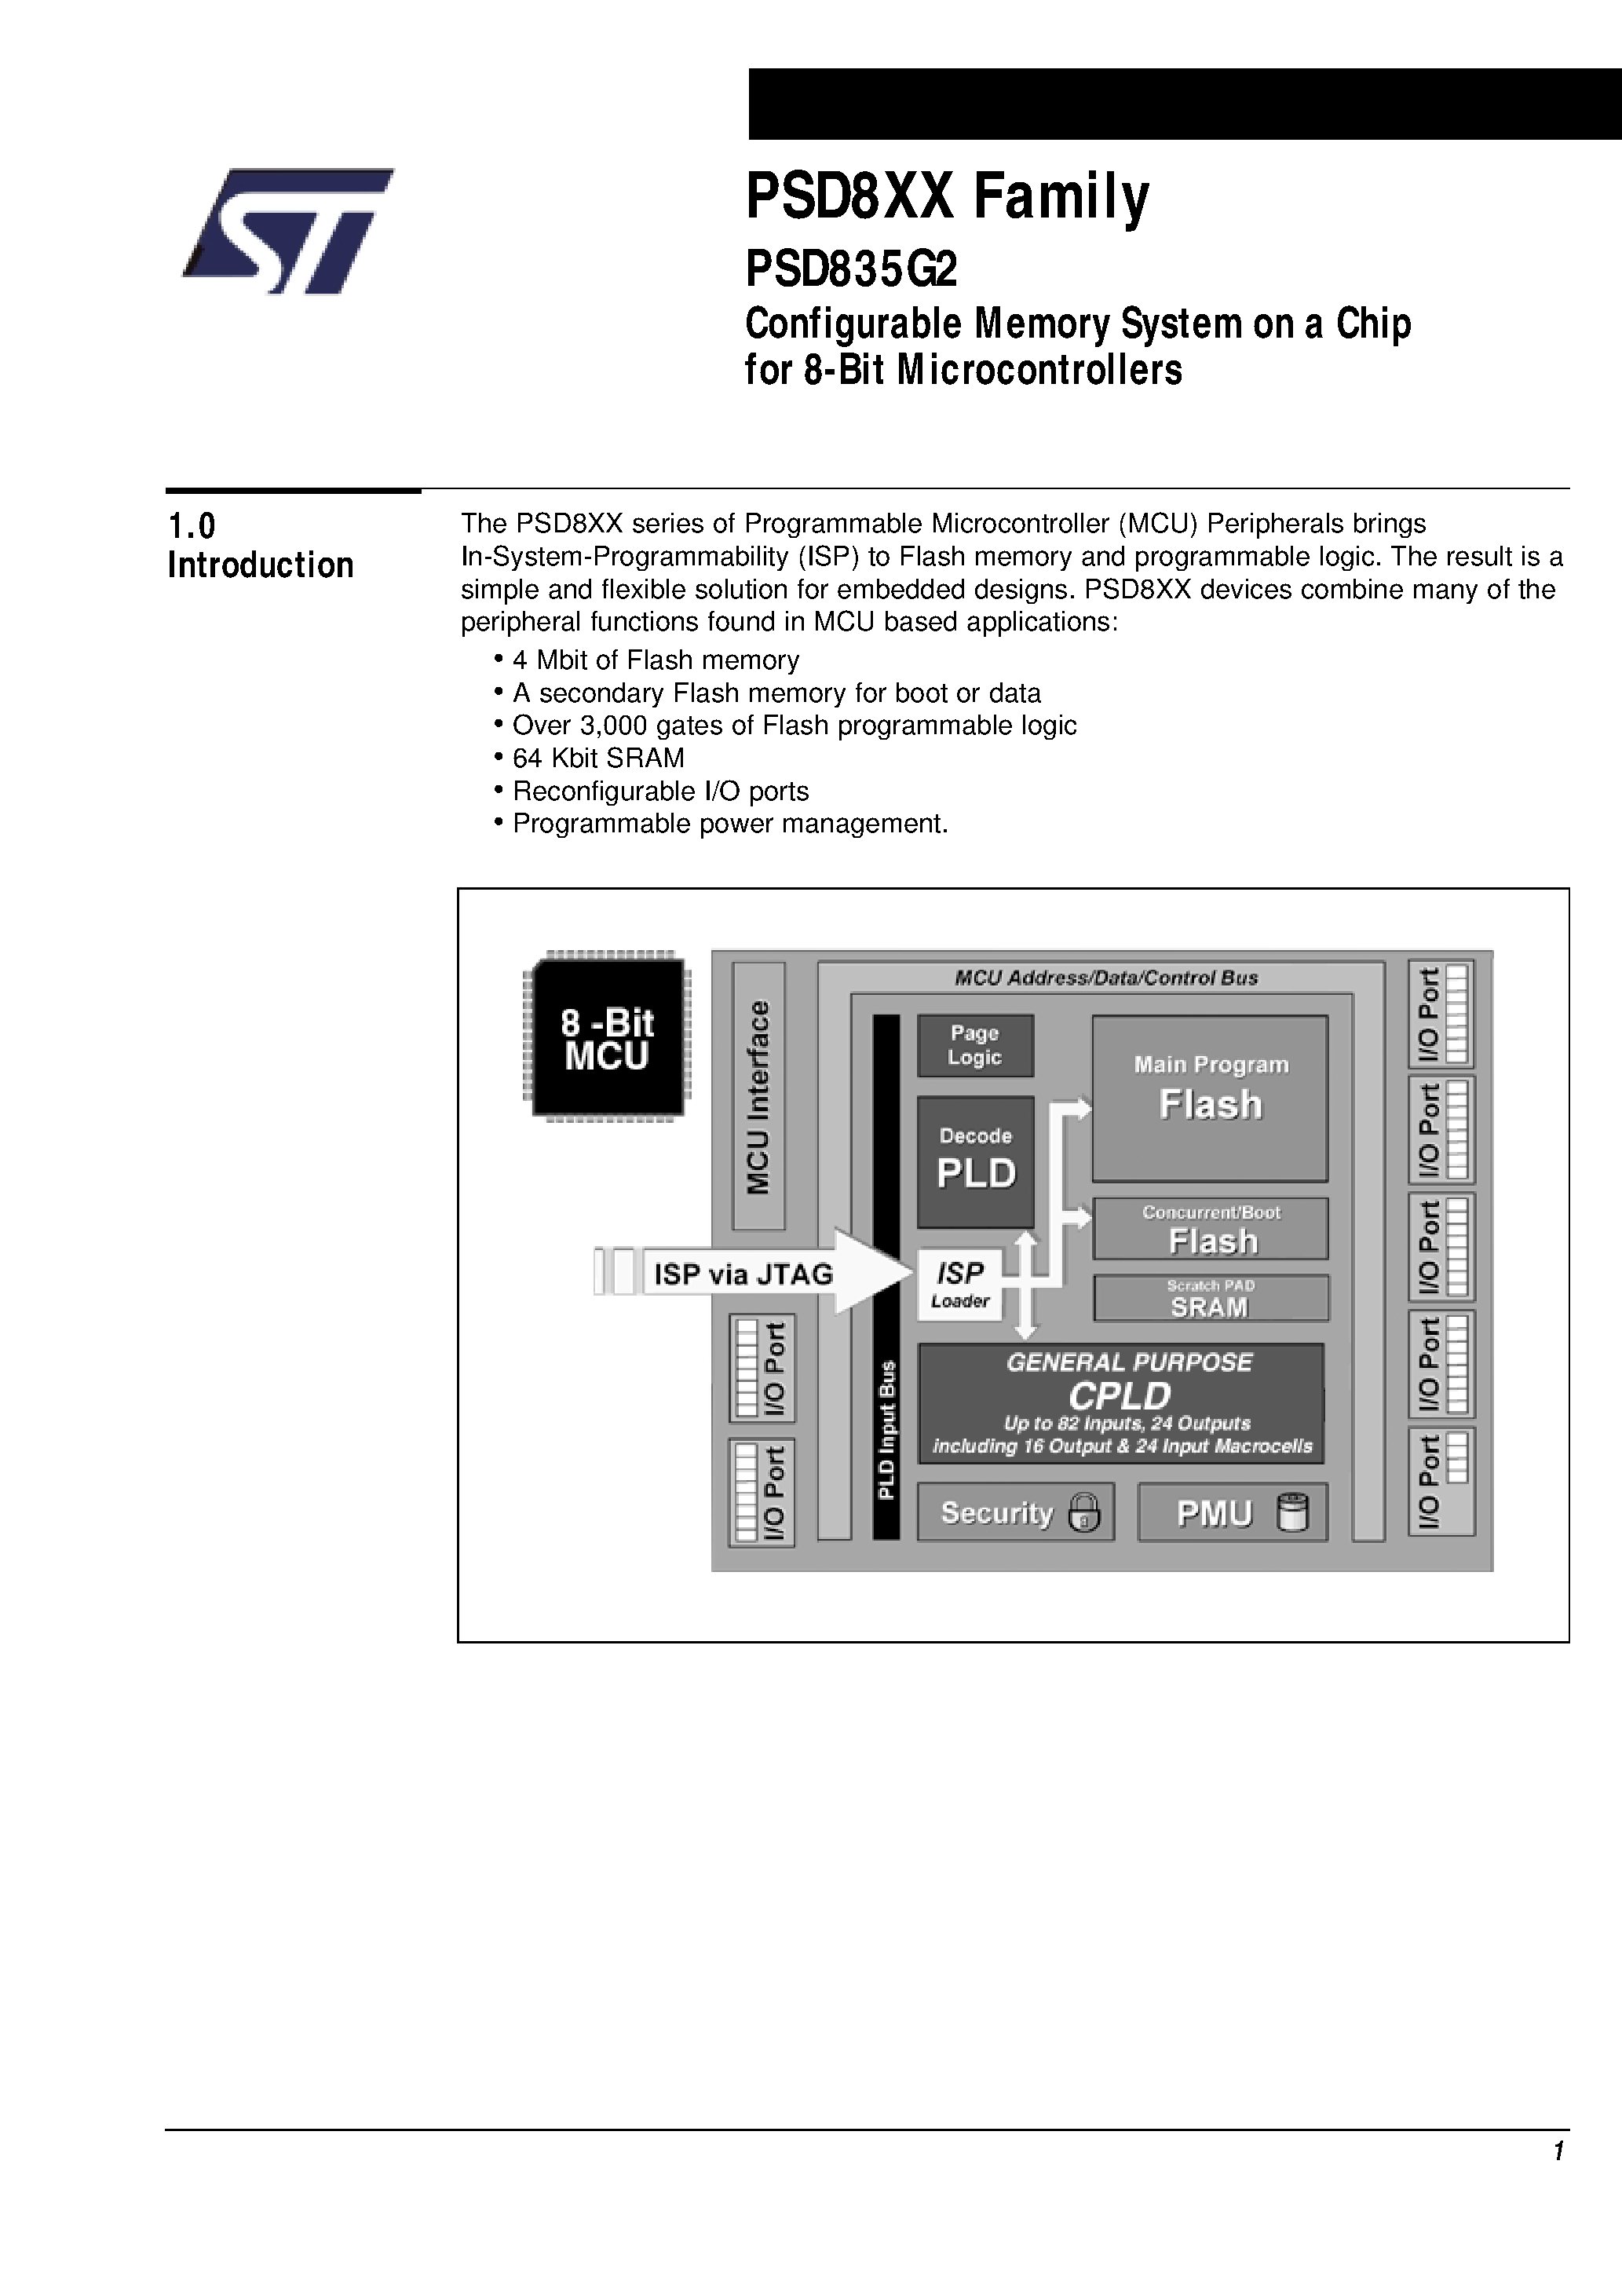 Datasheet PSD835F1-A-12B81 - Configurable Memory System on a Chip for 8-Bit Microcontrollers page 2